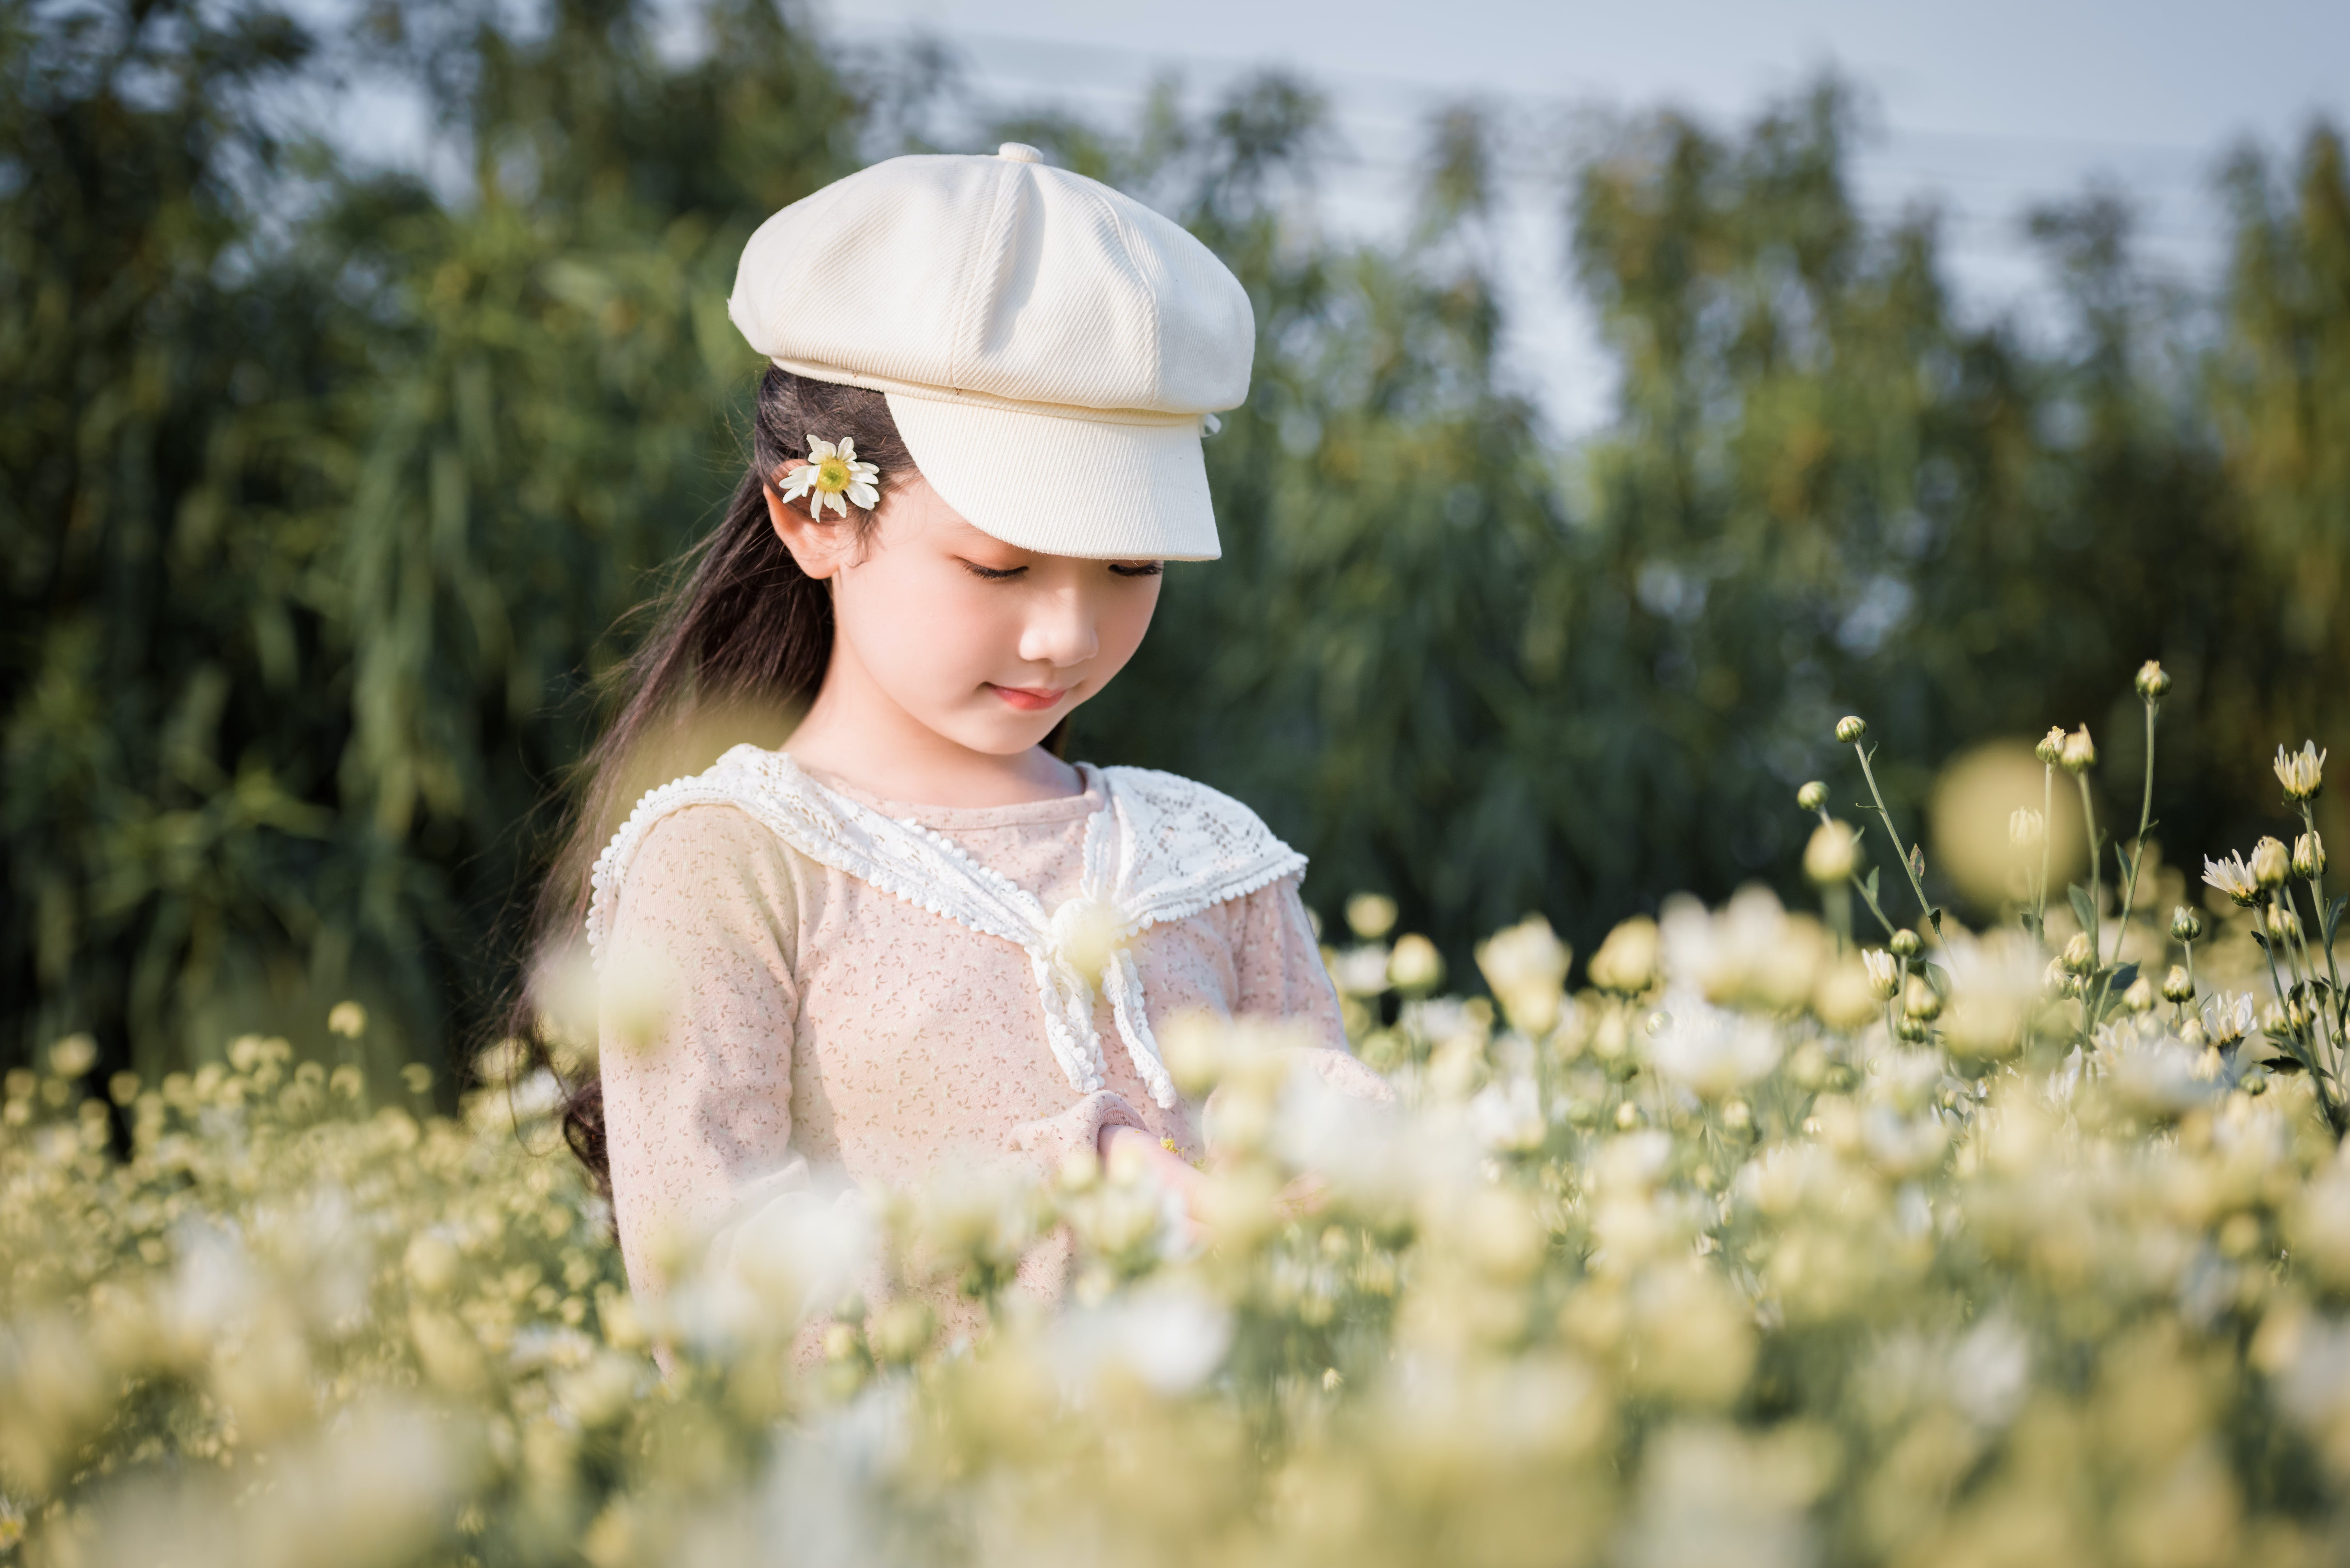 A young girl standing in a flower field. | Source: Pexels